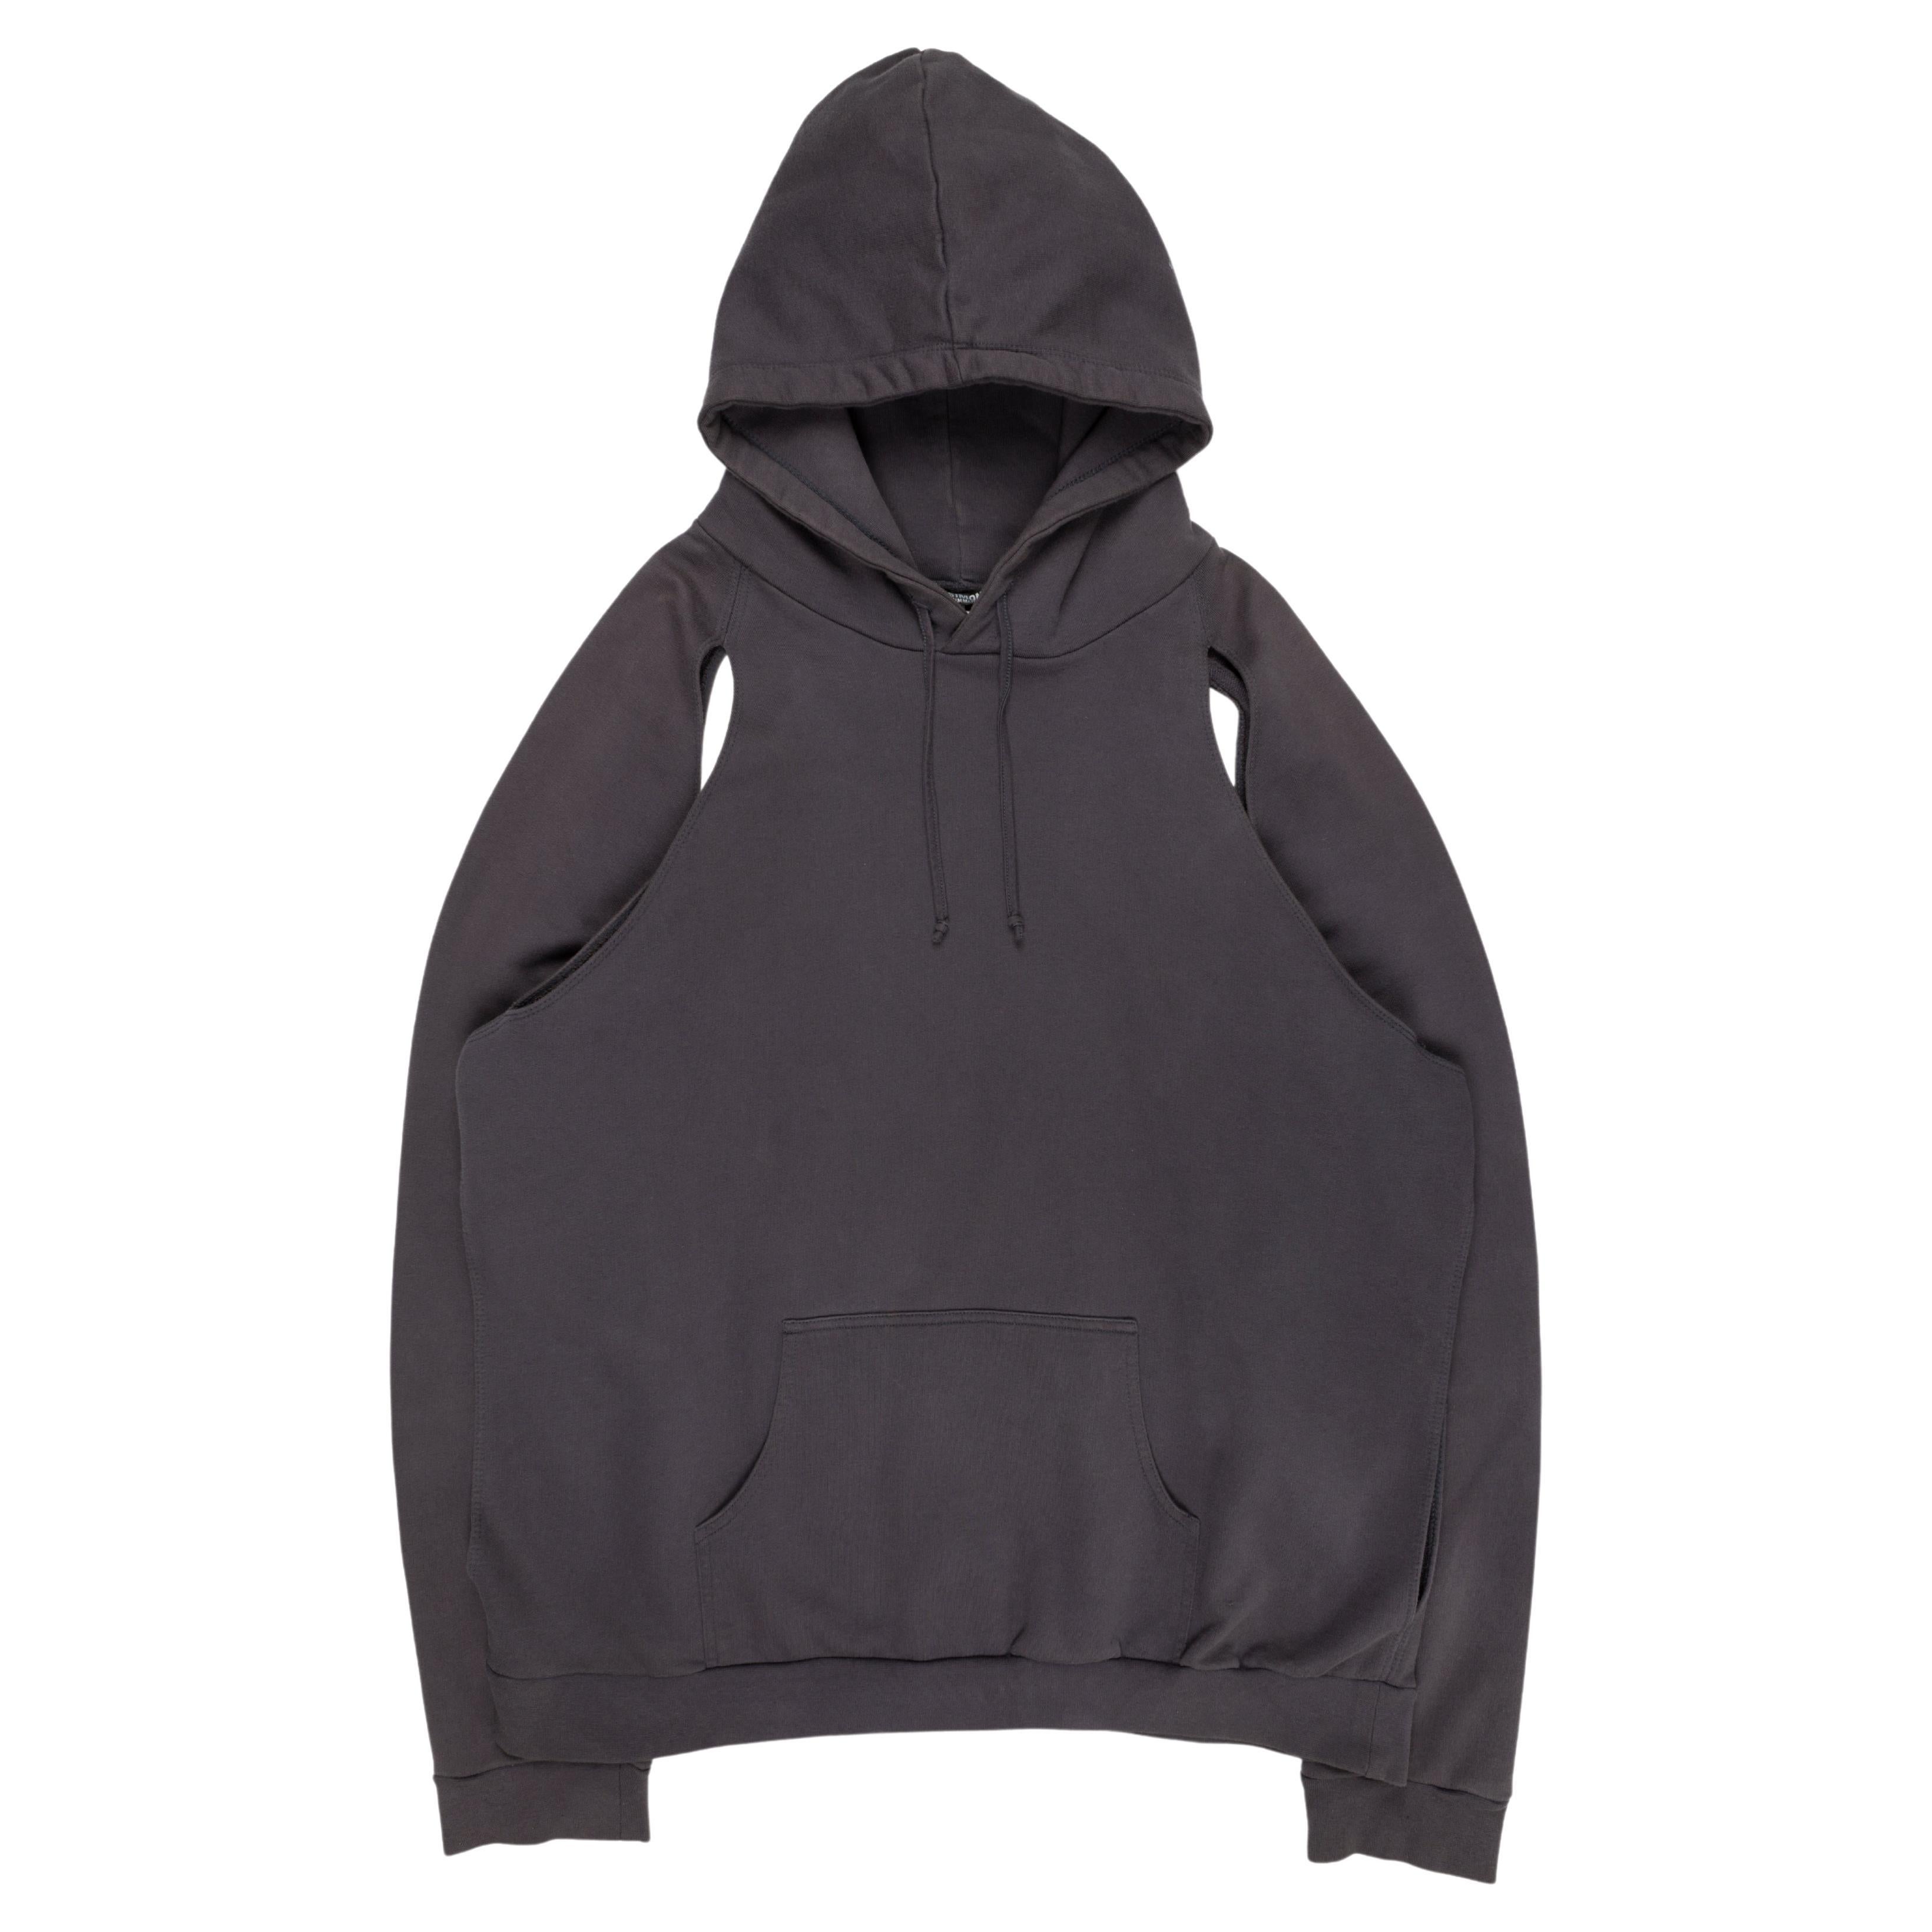 Anorak Hoodie With Initial RAF SIMONS Tag, OTHER BRANDS and more